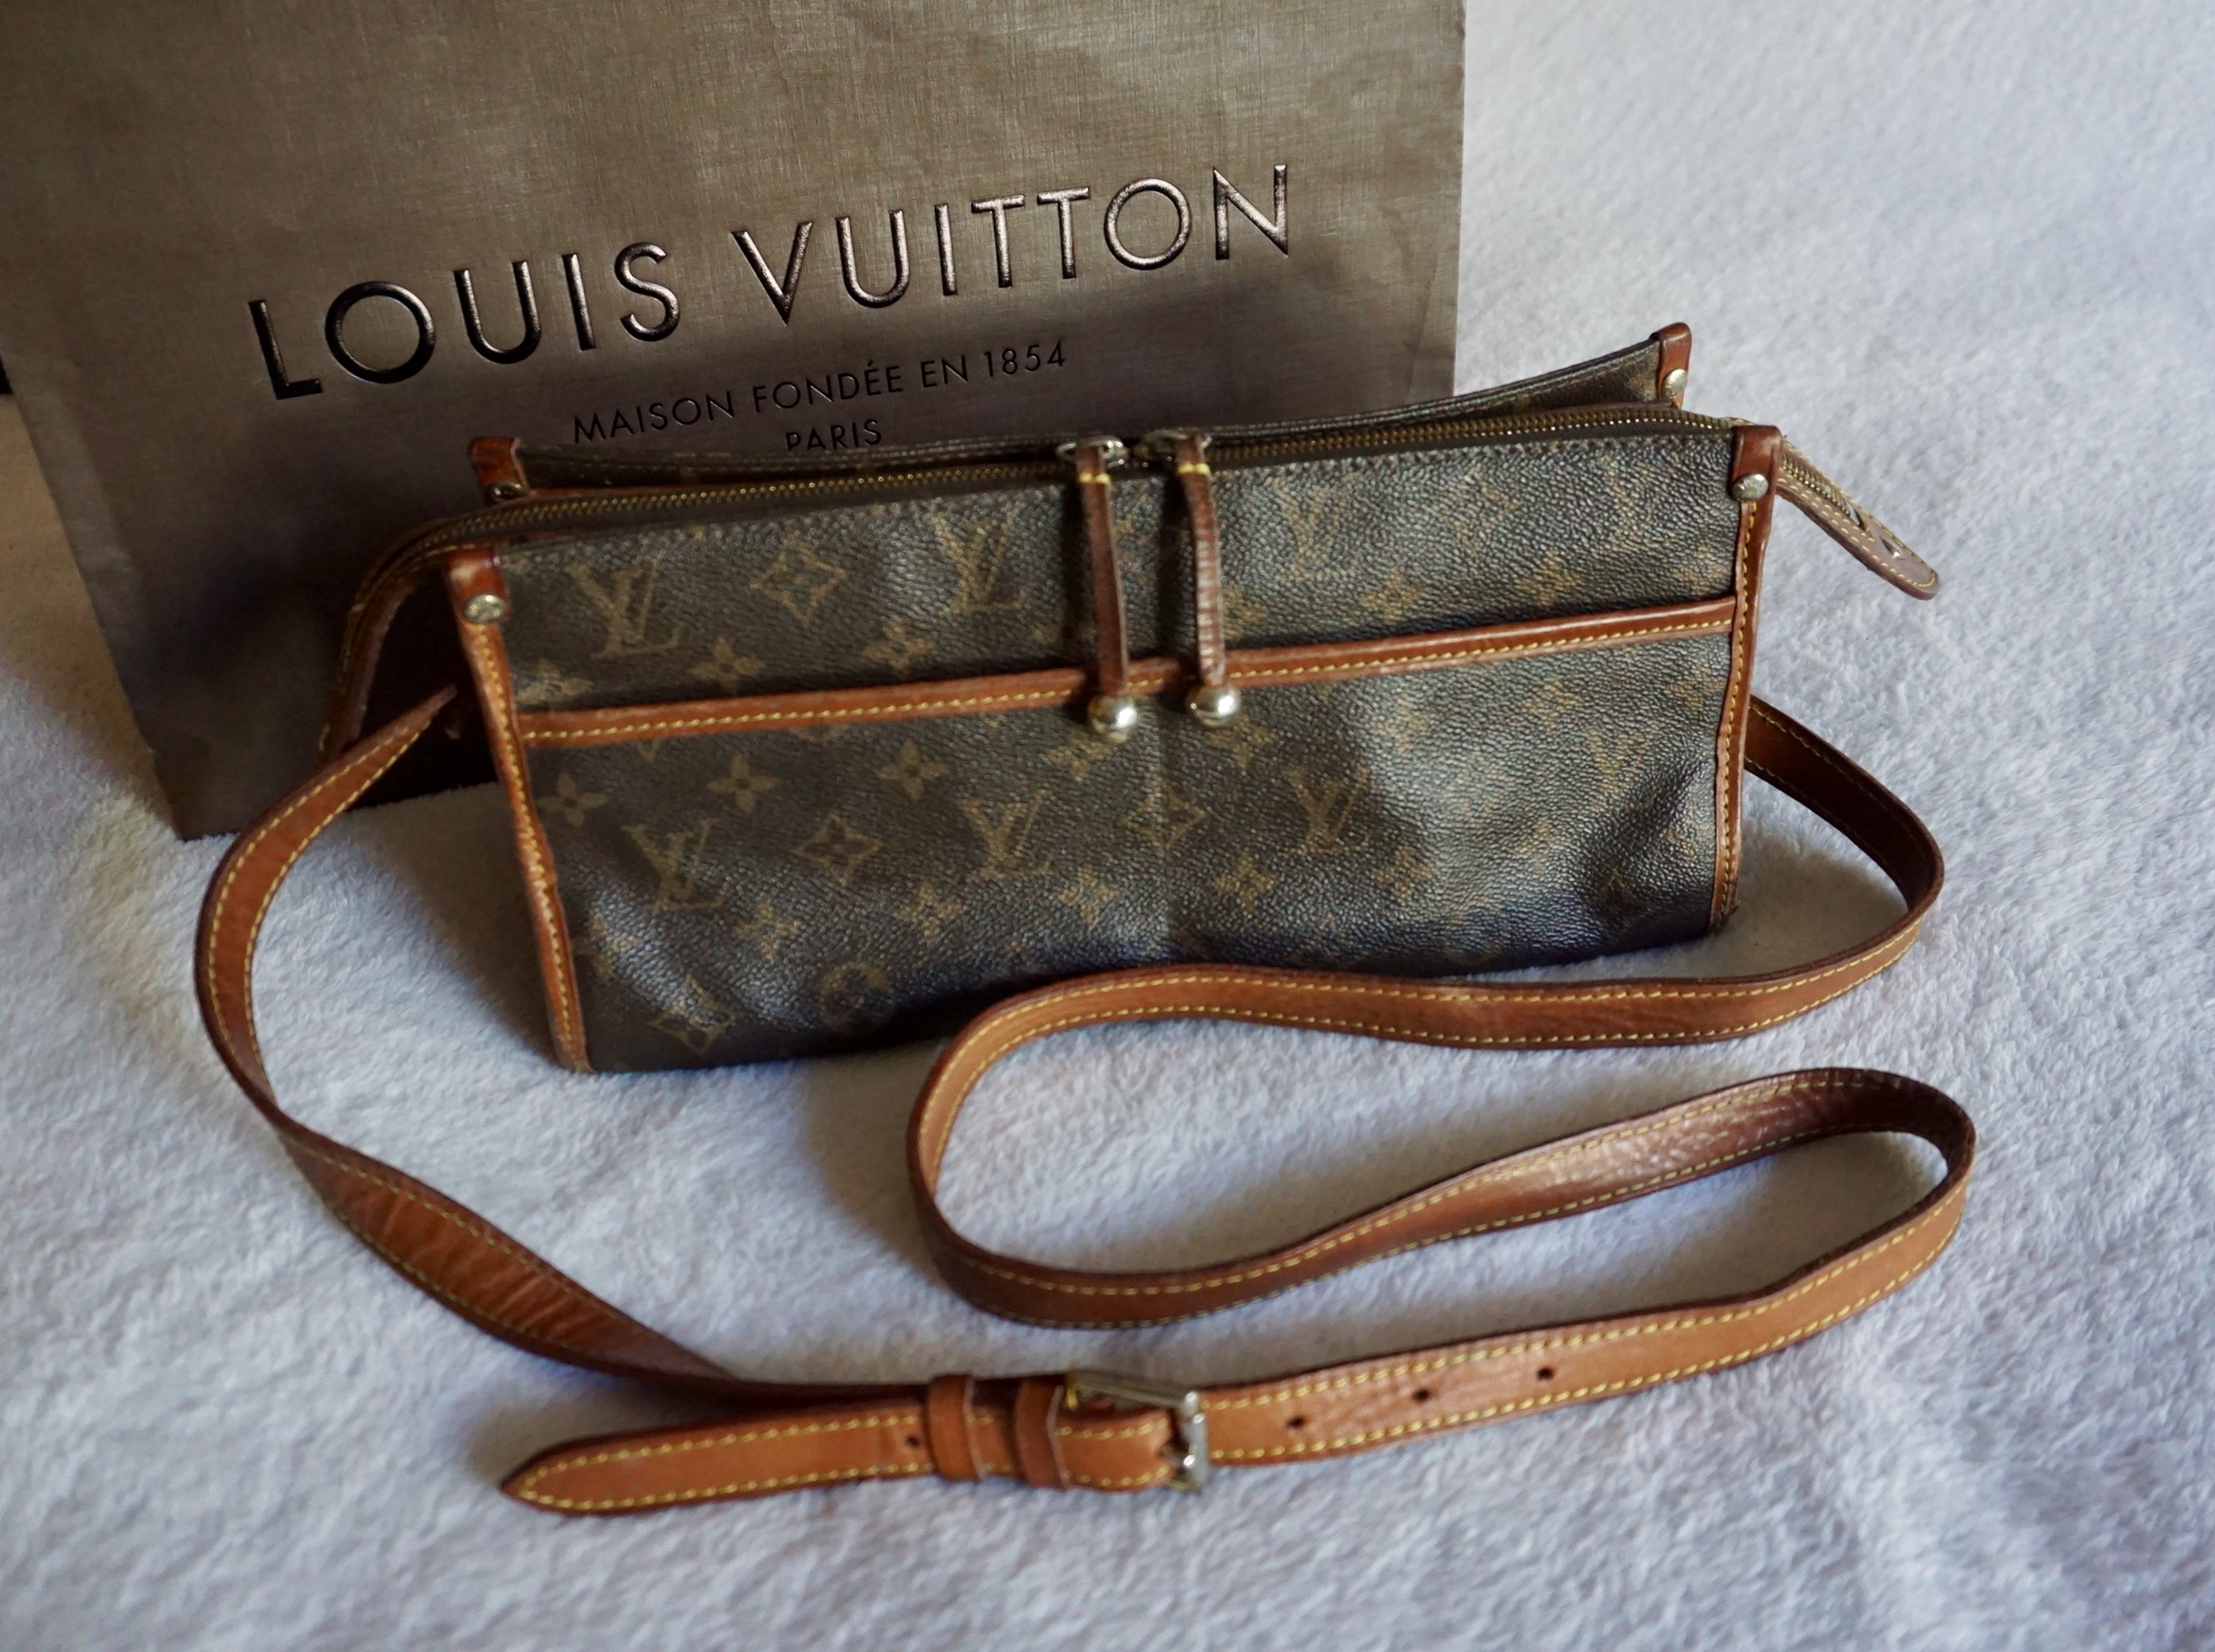 Louis Vuitton Maison Fondee 1854 Paris | Confederated Tribes of the Umatilla Indian Reservation